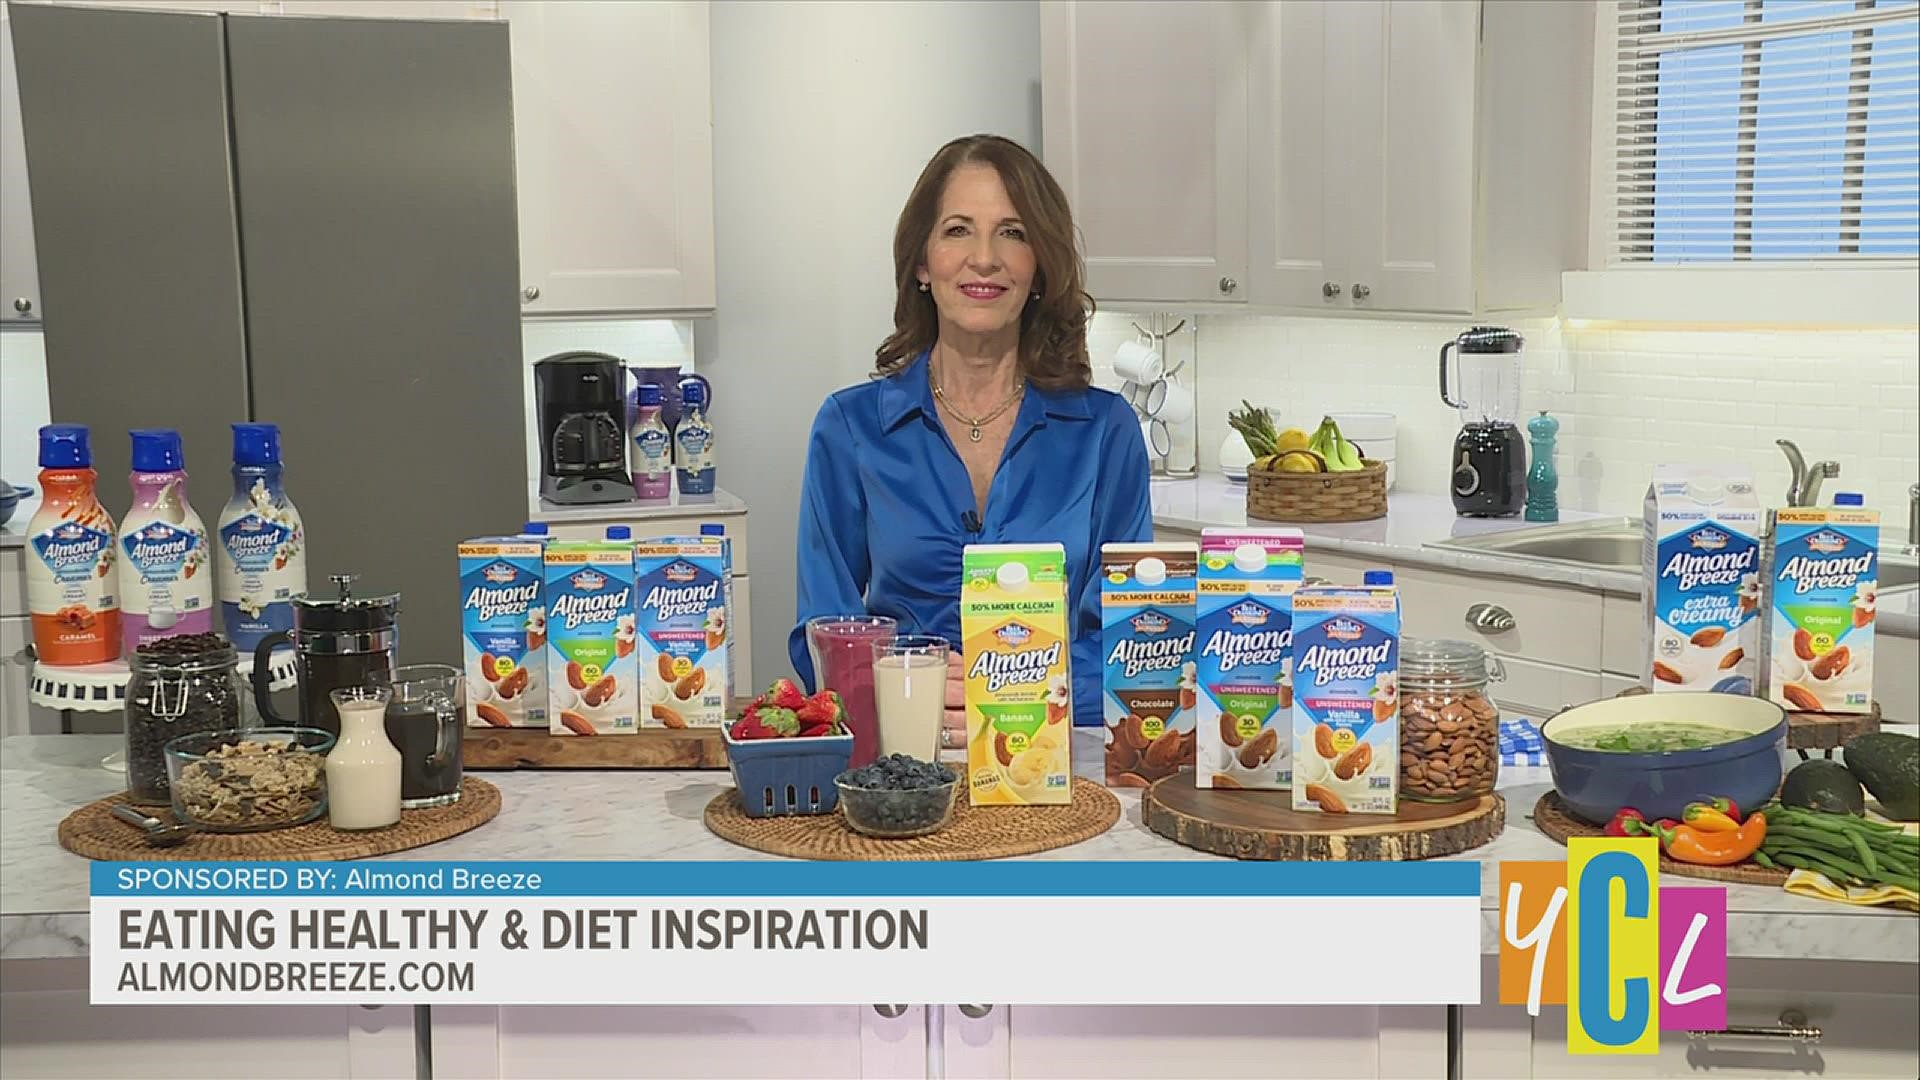 See what food and dieting trends you can anticipate this New Year and how they can make a big dietary impact. This segment is paid by Almond Breeze.